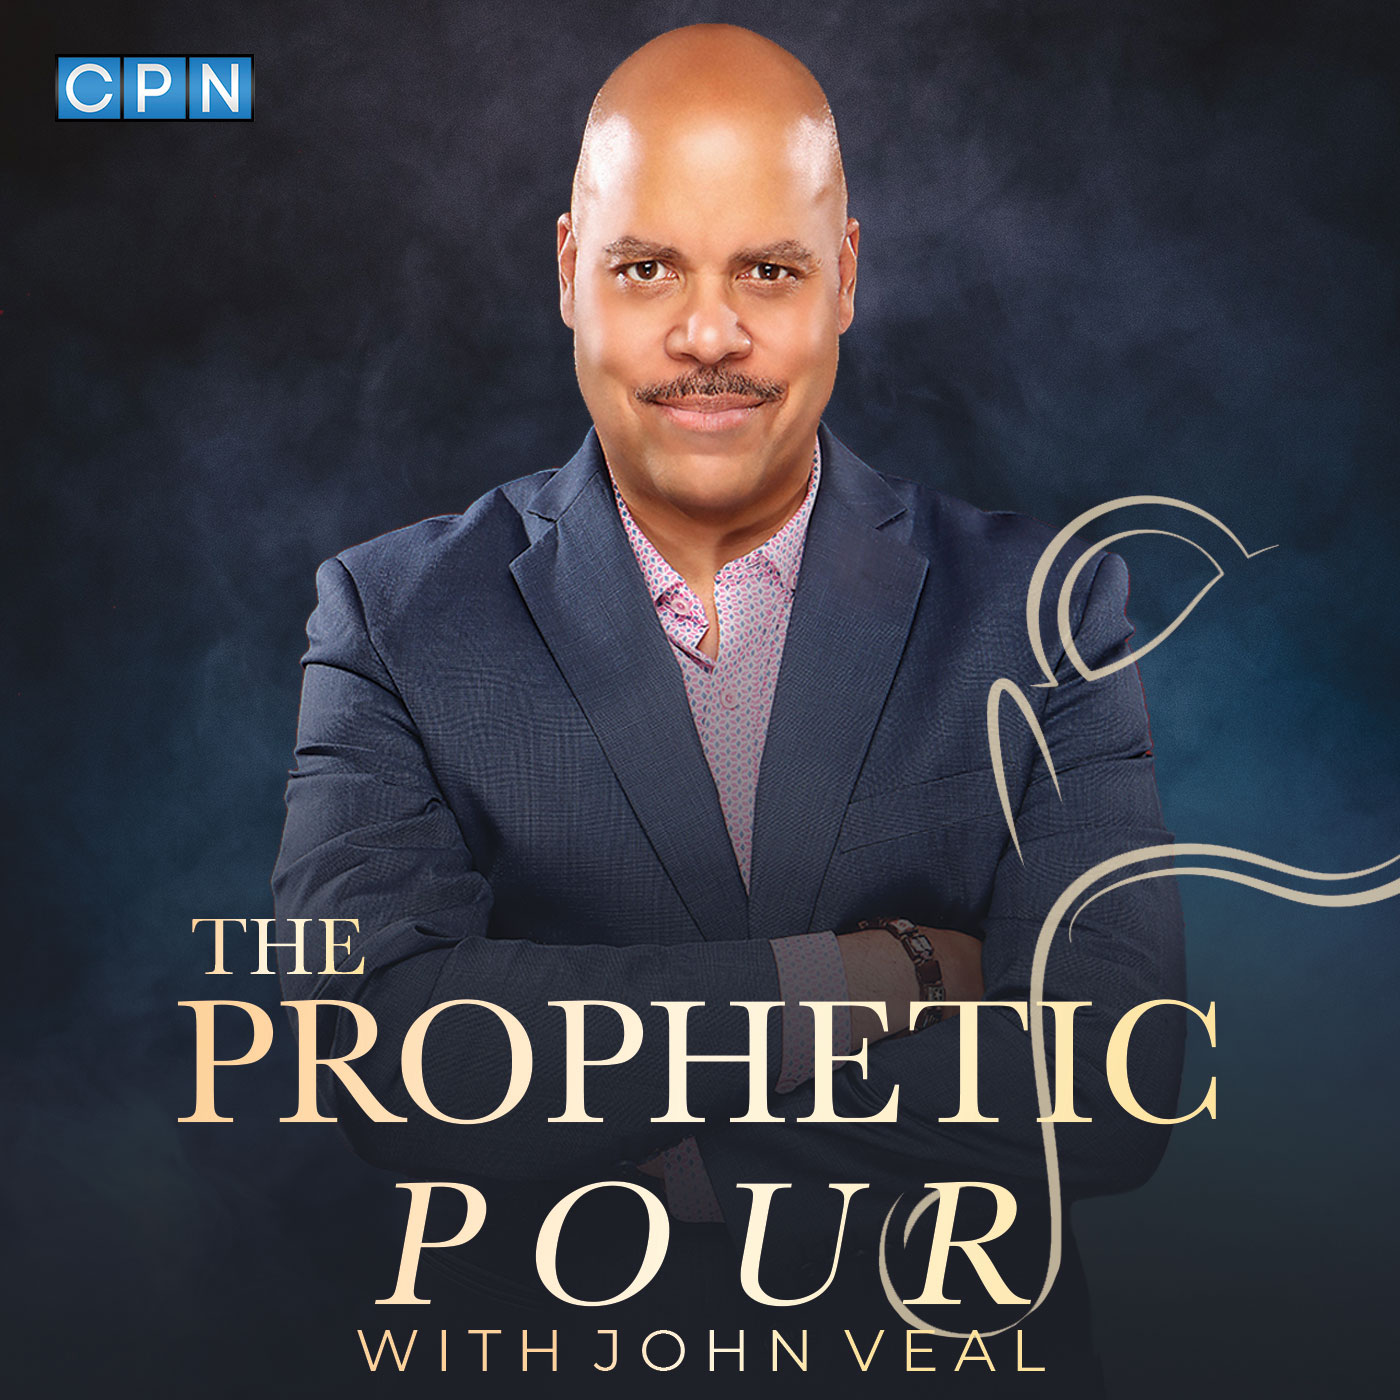 Did The Prophetic Word You Received Come From A Prophet Or A Psychic? PT 2 (How To Tell The Difference)